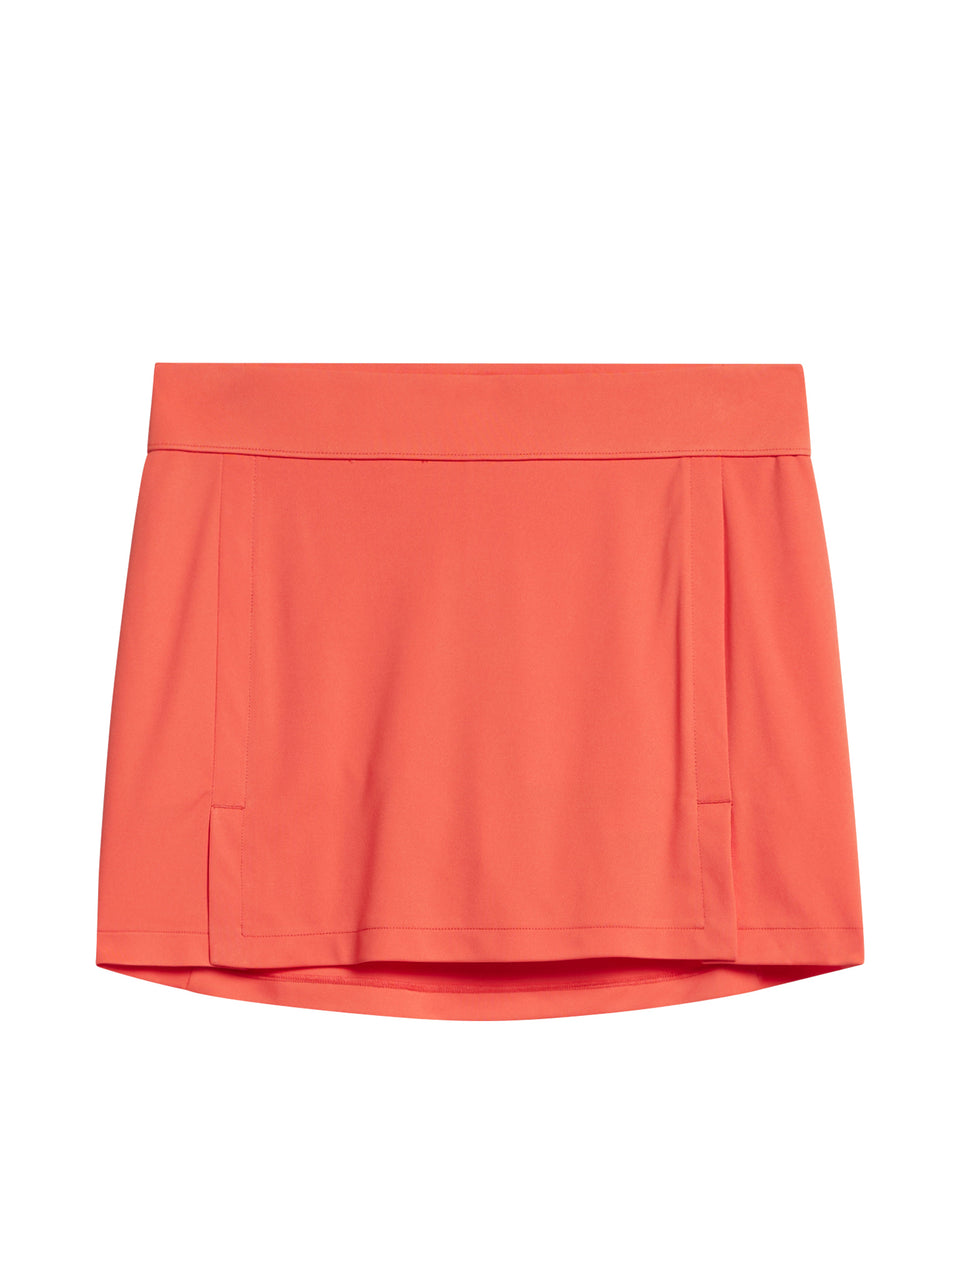 Amelie Skirt / Hot Coral